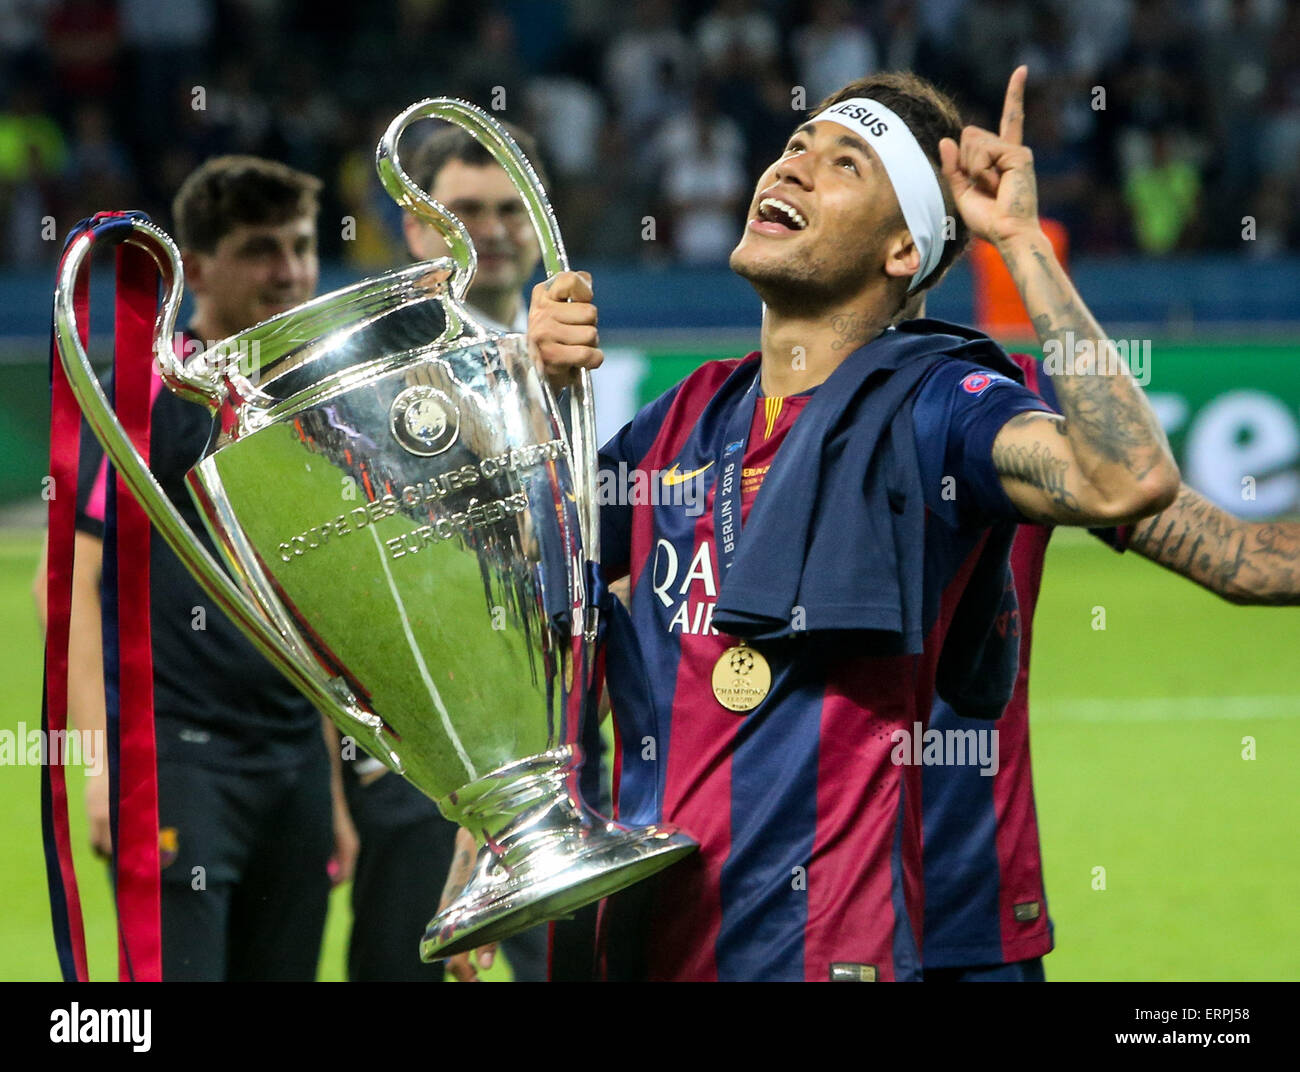 Berlin Germany 6th June 15 Neymar C Of Fc Barcelona Celebrates With The Trophy After The Uefa Champions League Final Match Between Juventus F C And Fc Barcelona In Berlin Germany June 6